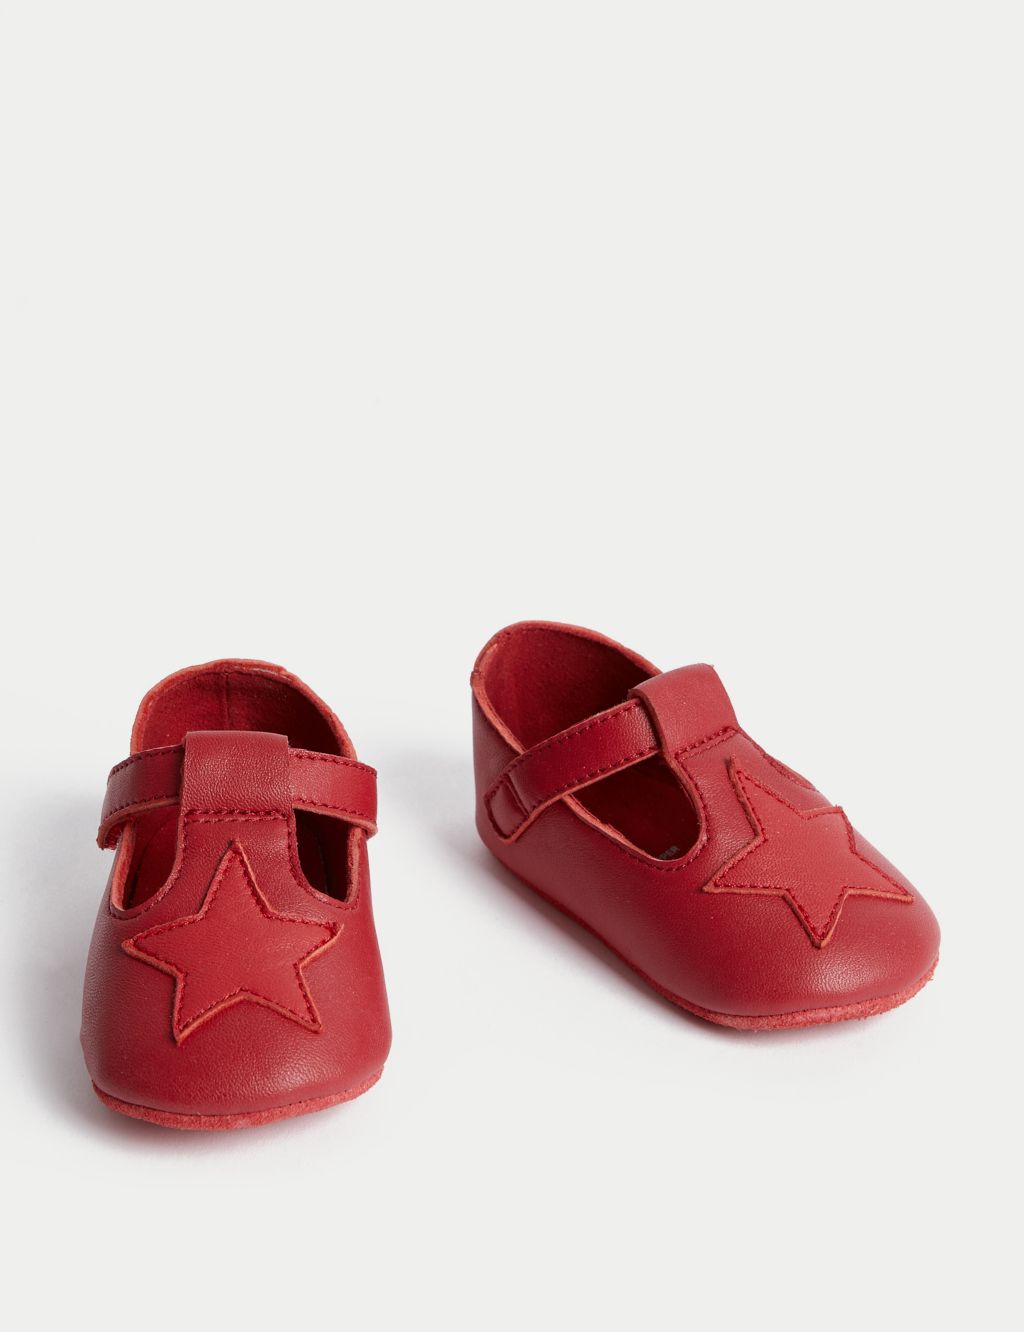 Kids' Leather Star Pre-Walkers (0-18 Mths) image 2